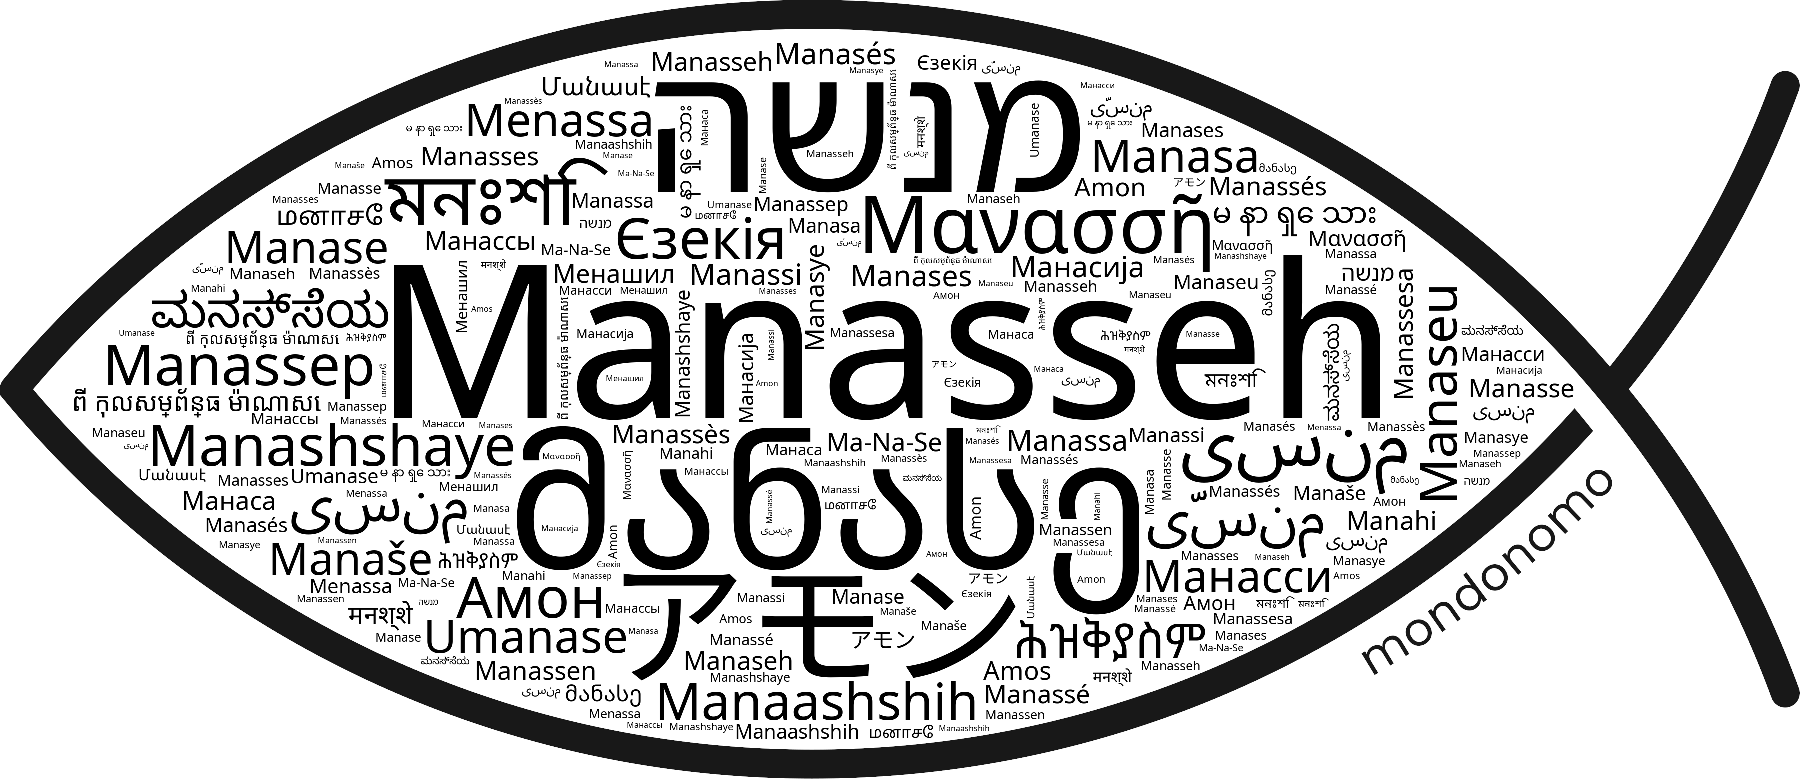 Name Manasseh in the world's Bibles